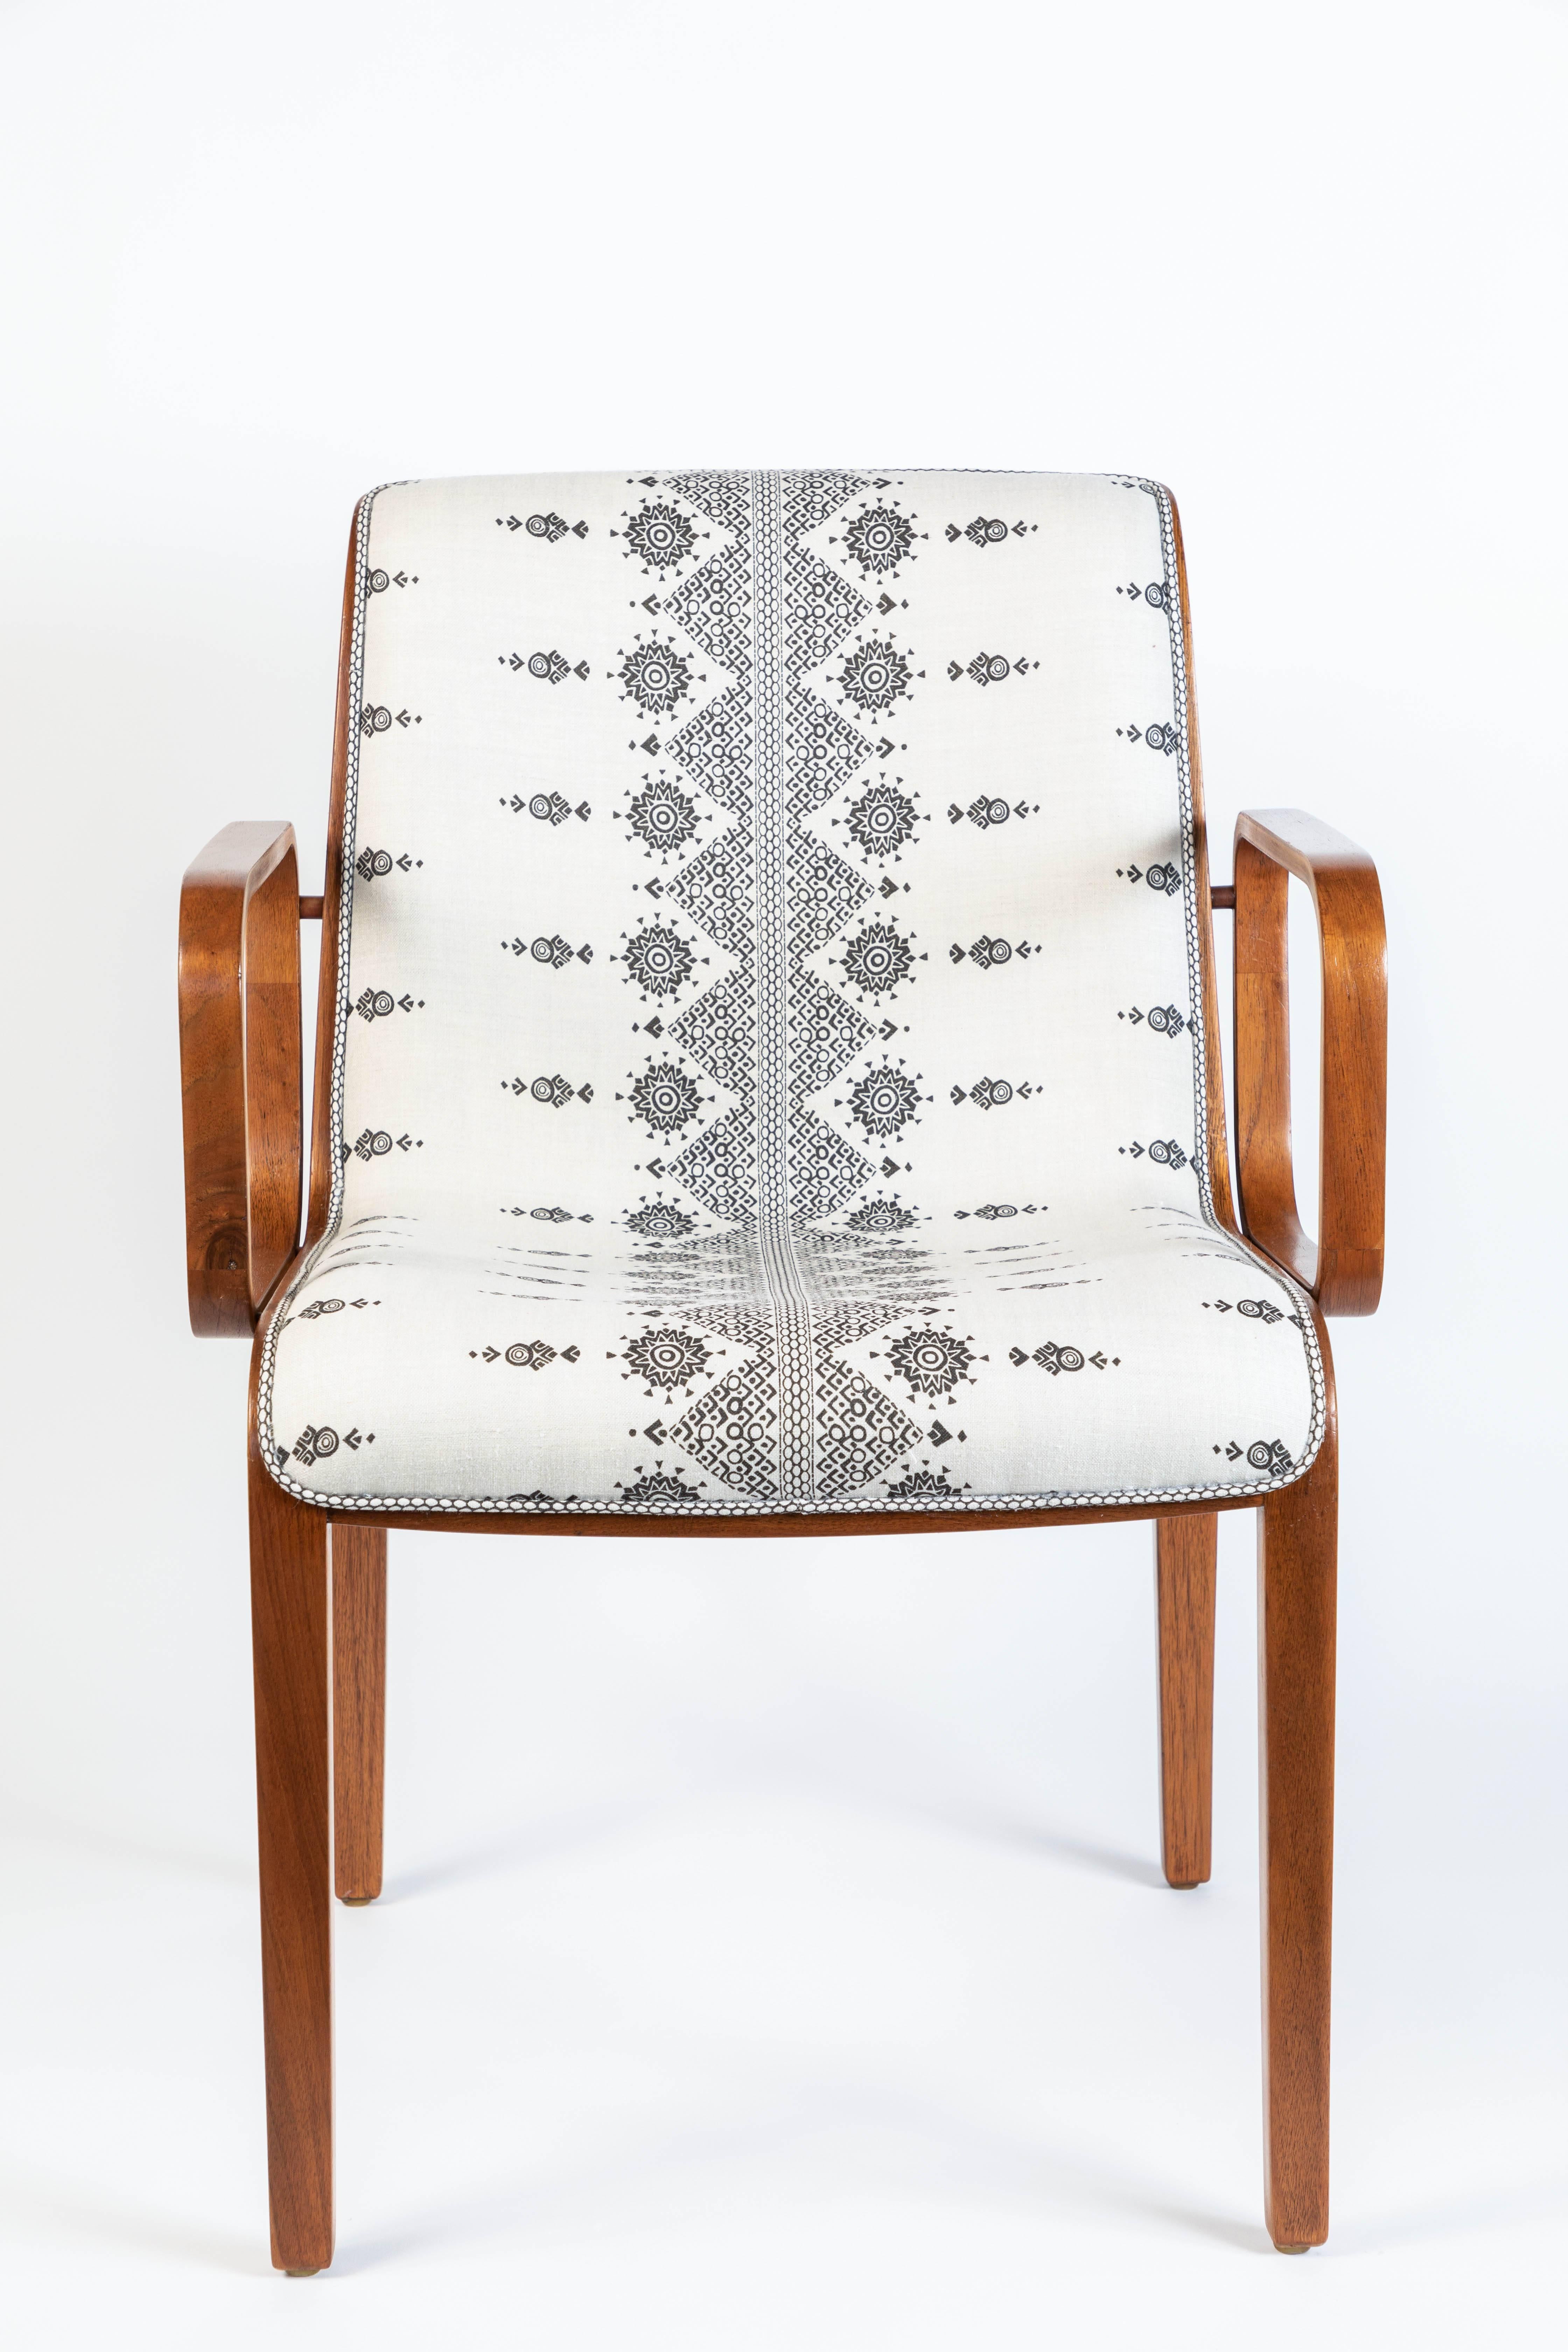 This midcentury bentwood armchair has been newly upholstered in Peter Dunham 